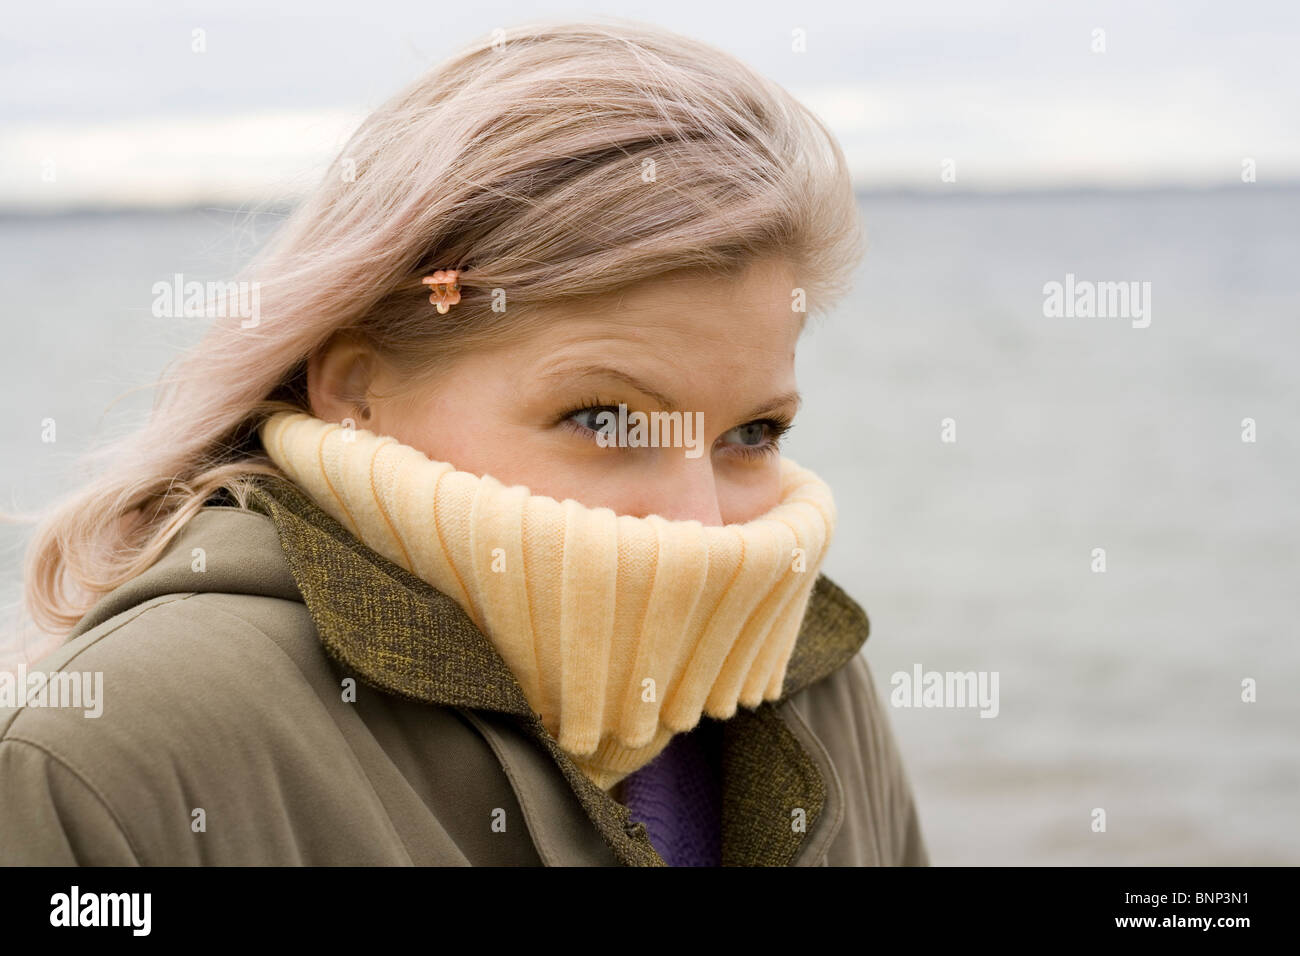 Really cold! A blond girl in a coat and sweater portrait on cold wind. Lake in a background. Stock Photo